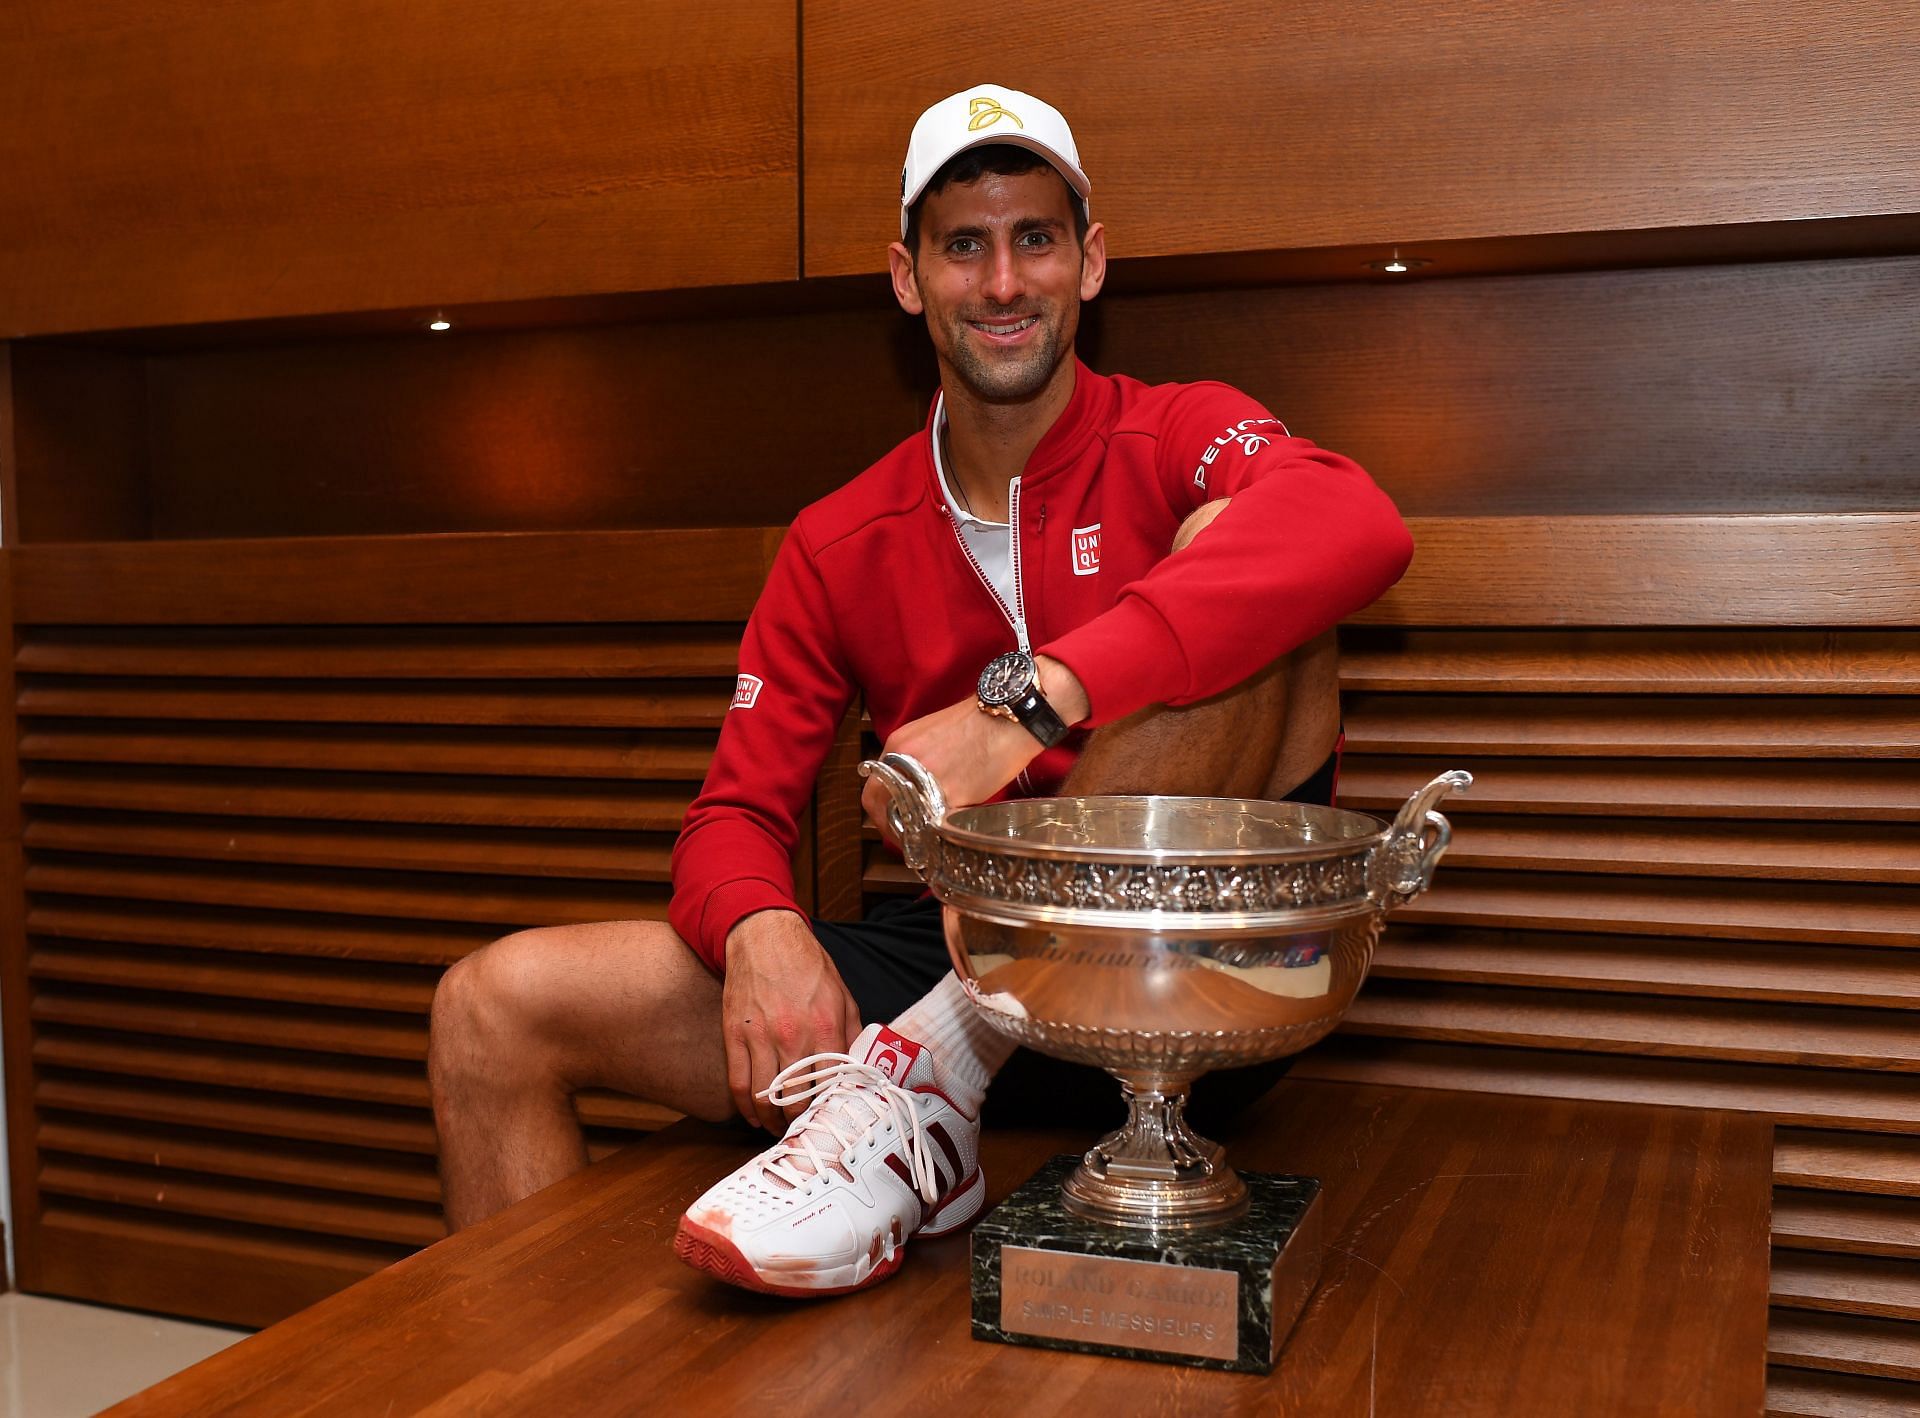 The 2016 French Open triumph gave Novak Djokovic a Major on every surface